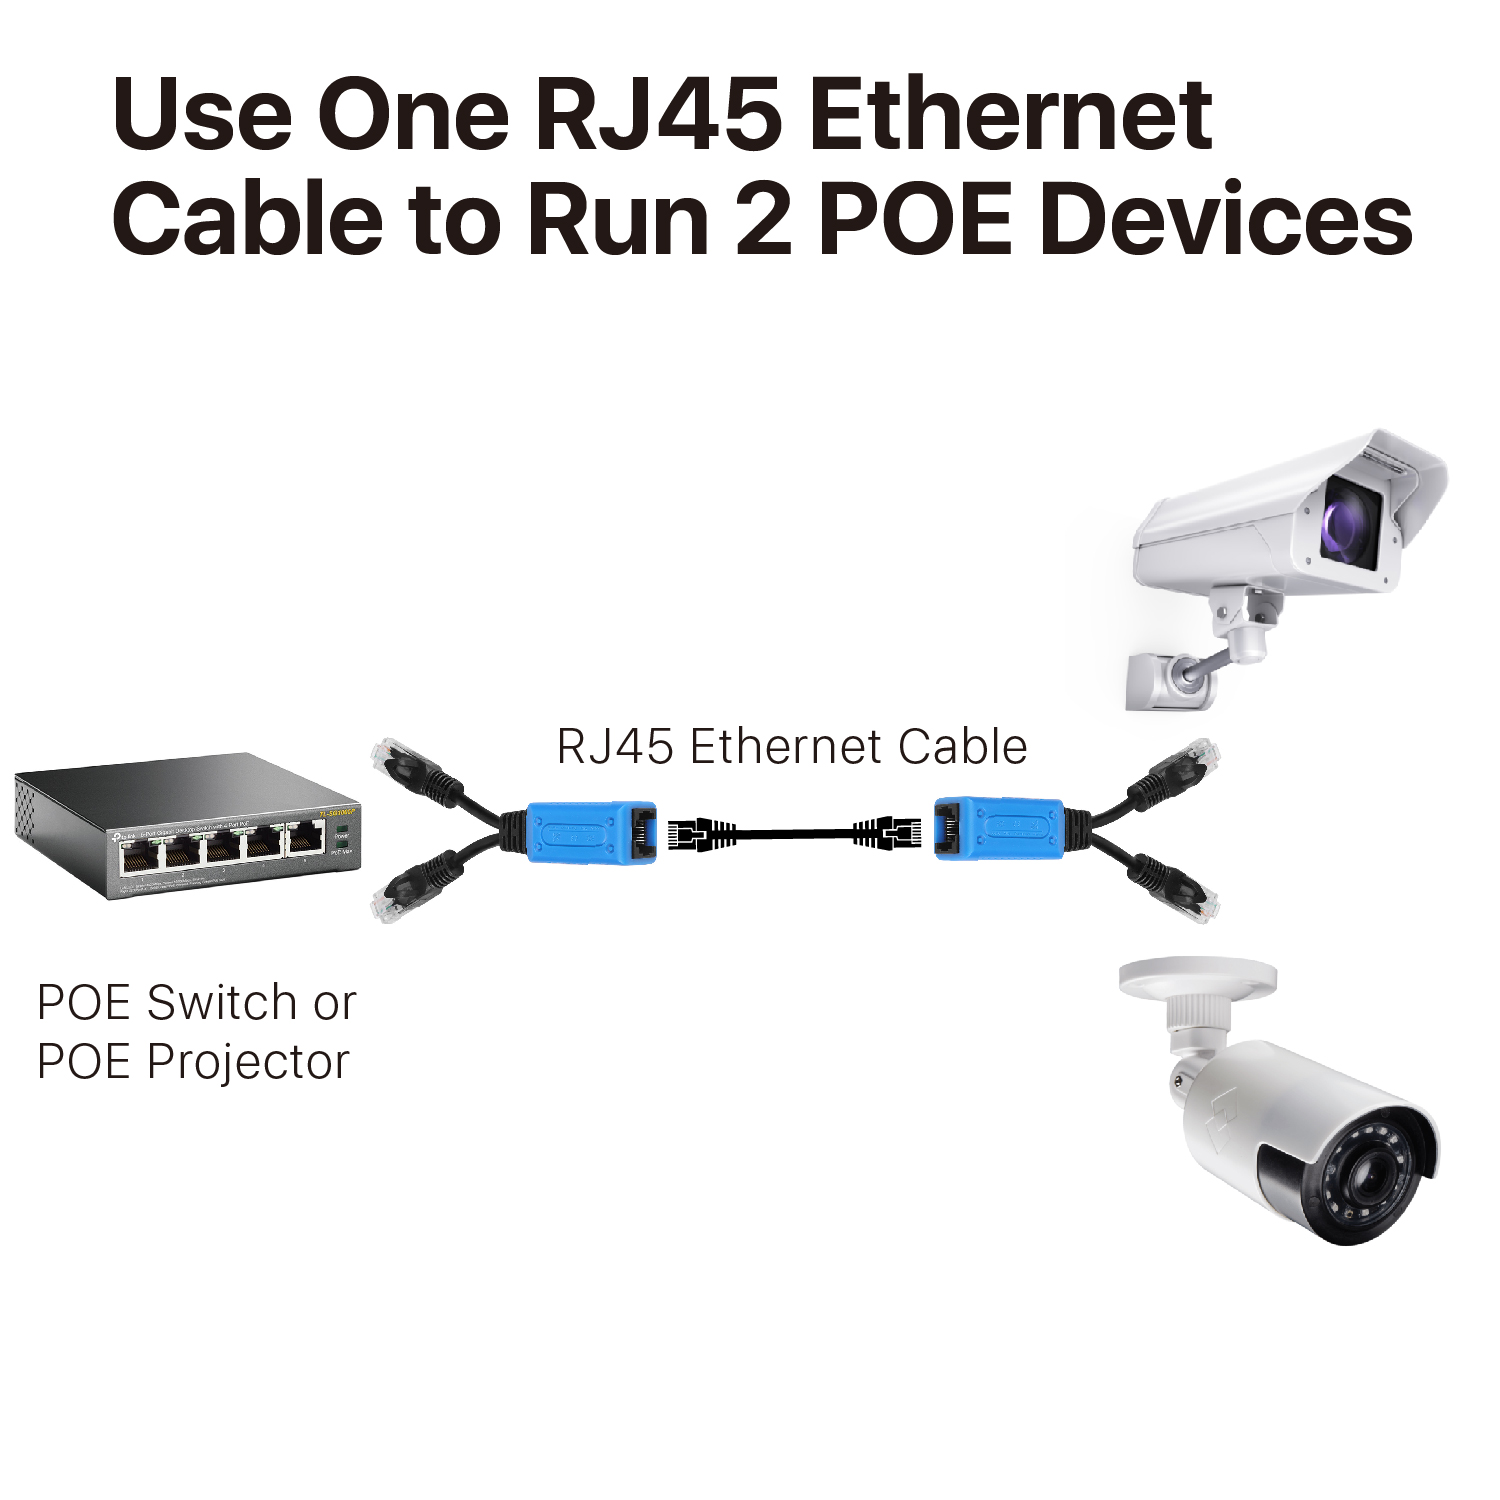 RJ45 Ethernet Cable Combiner / Splitter Kit (1 Pair) - 2 Male to 1 Female POE Data Adapter LAN Ethernet Network Extender Y Splitter Cat5 Cat5e Cat6 UPOE Cable for Surveillance Security Monitoring - image 5 of 7